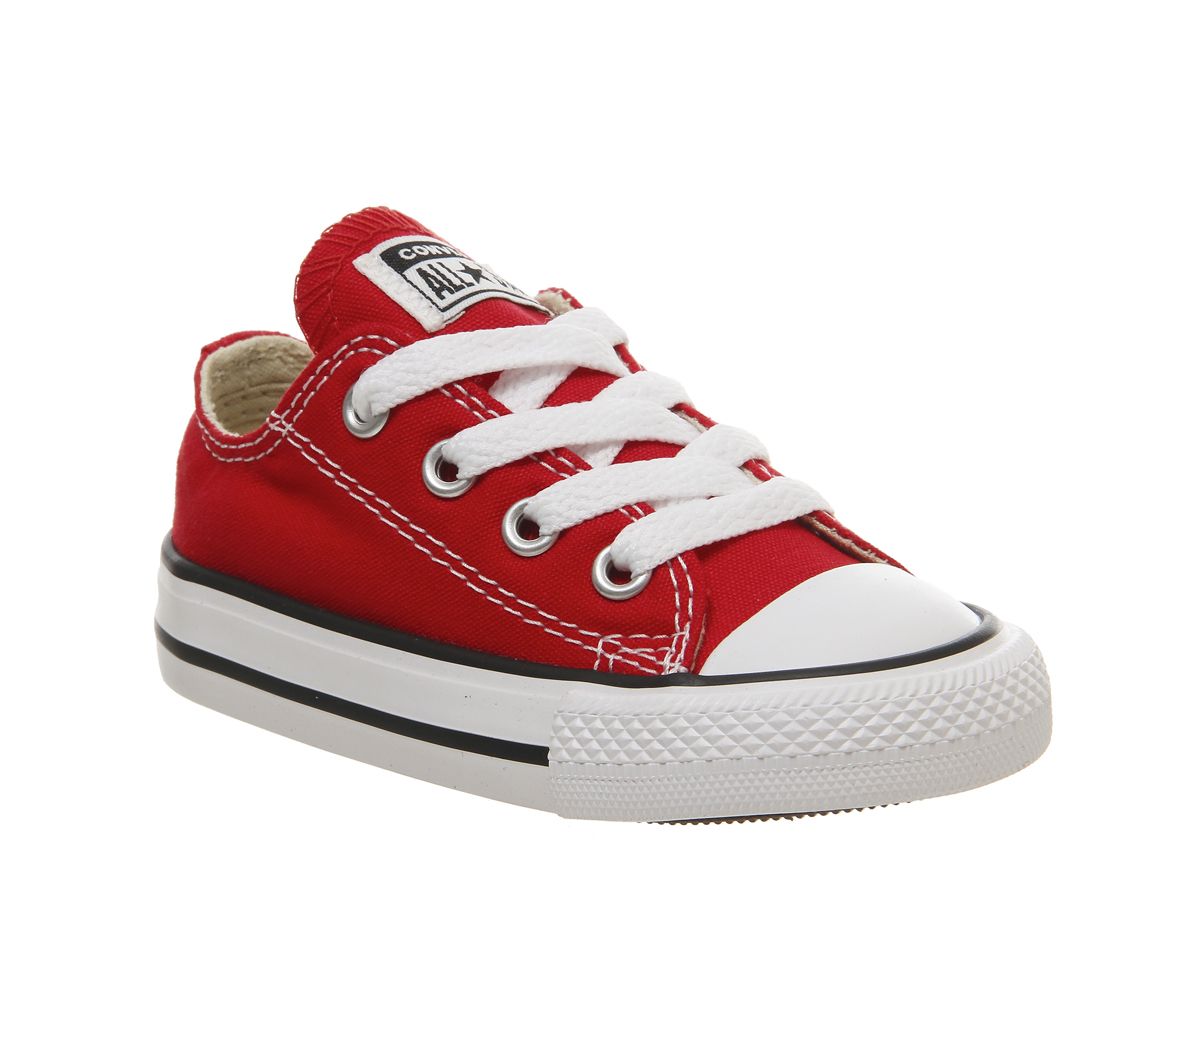 Converse All Star Low Infant Shoes Red - Unisex